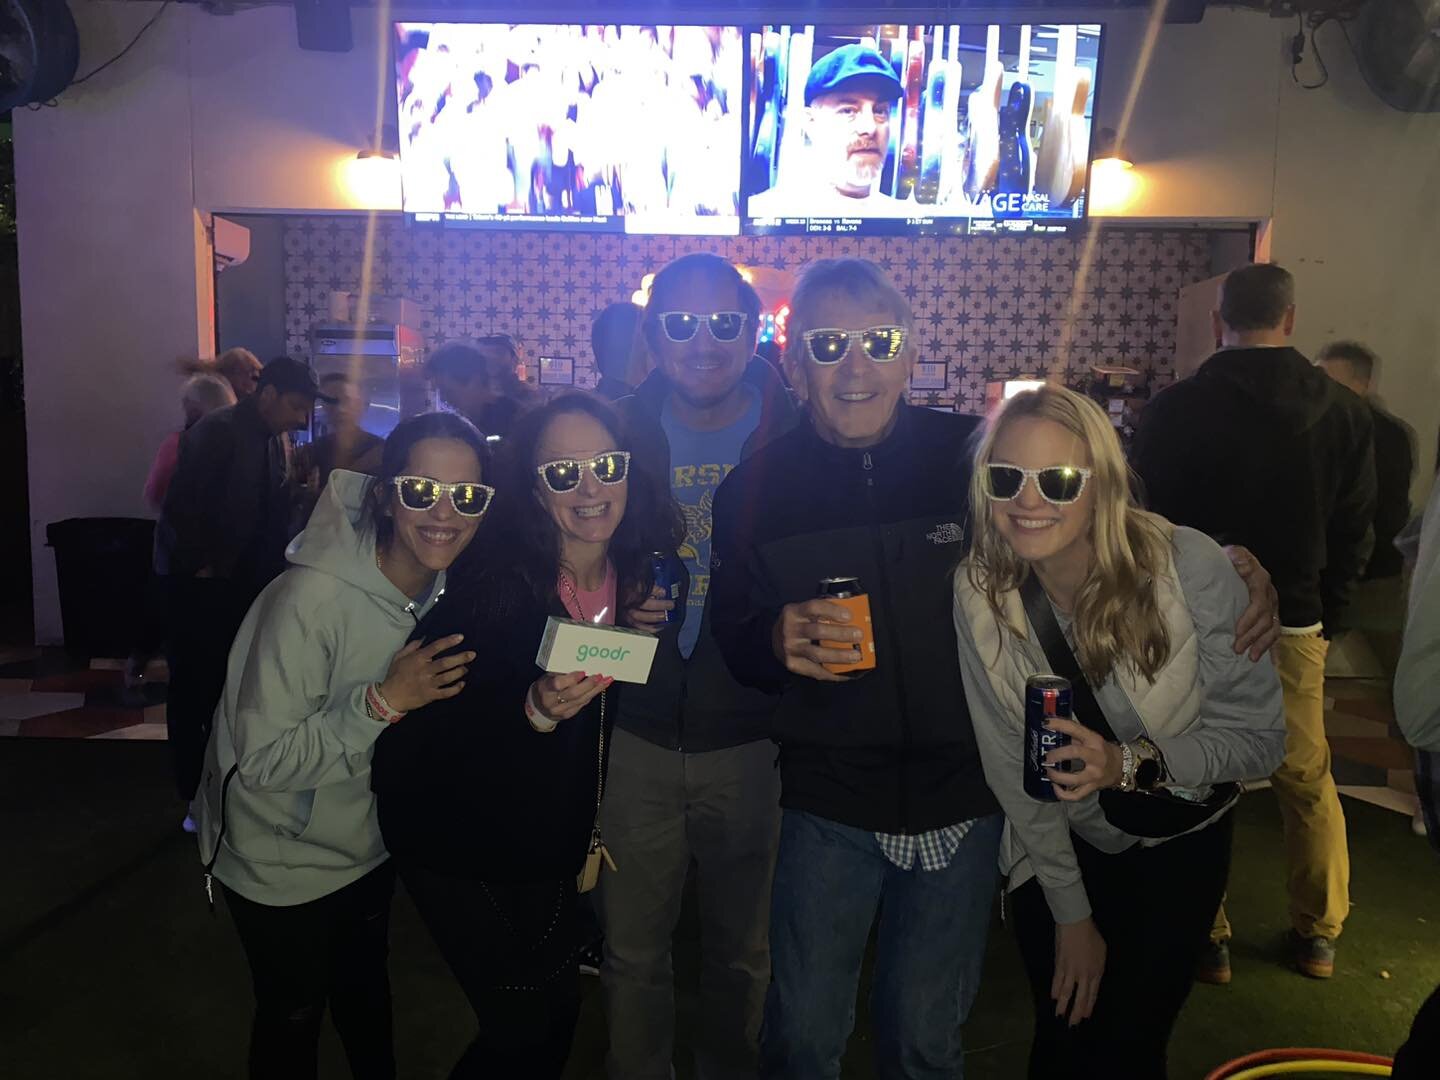 Who wears their sunglasses at night? 
Well apparently our Varsity Managers and staff on a &ldquo;business trip&rdquo; to The Running Event in Austin do. 
GoodR party tonight!